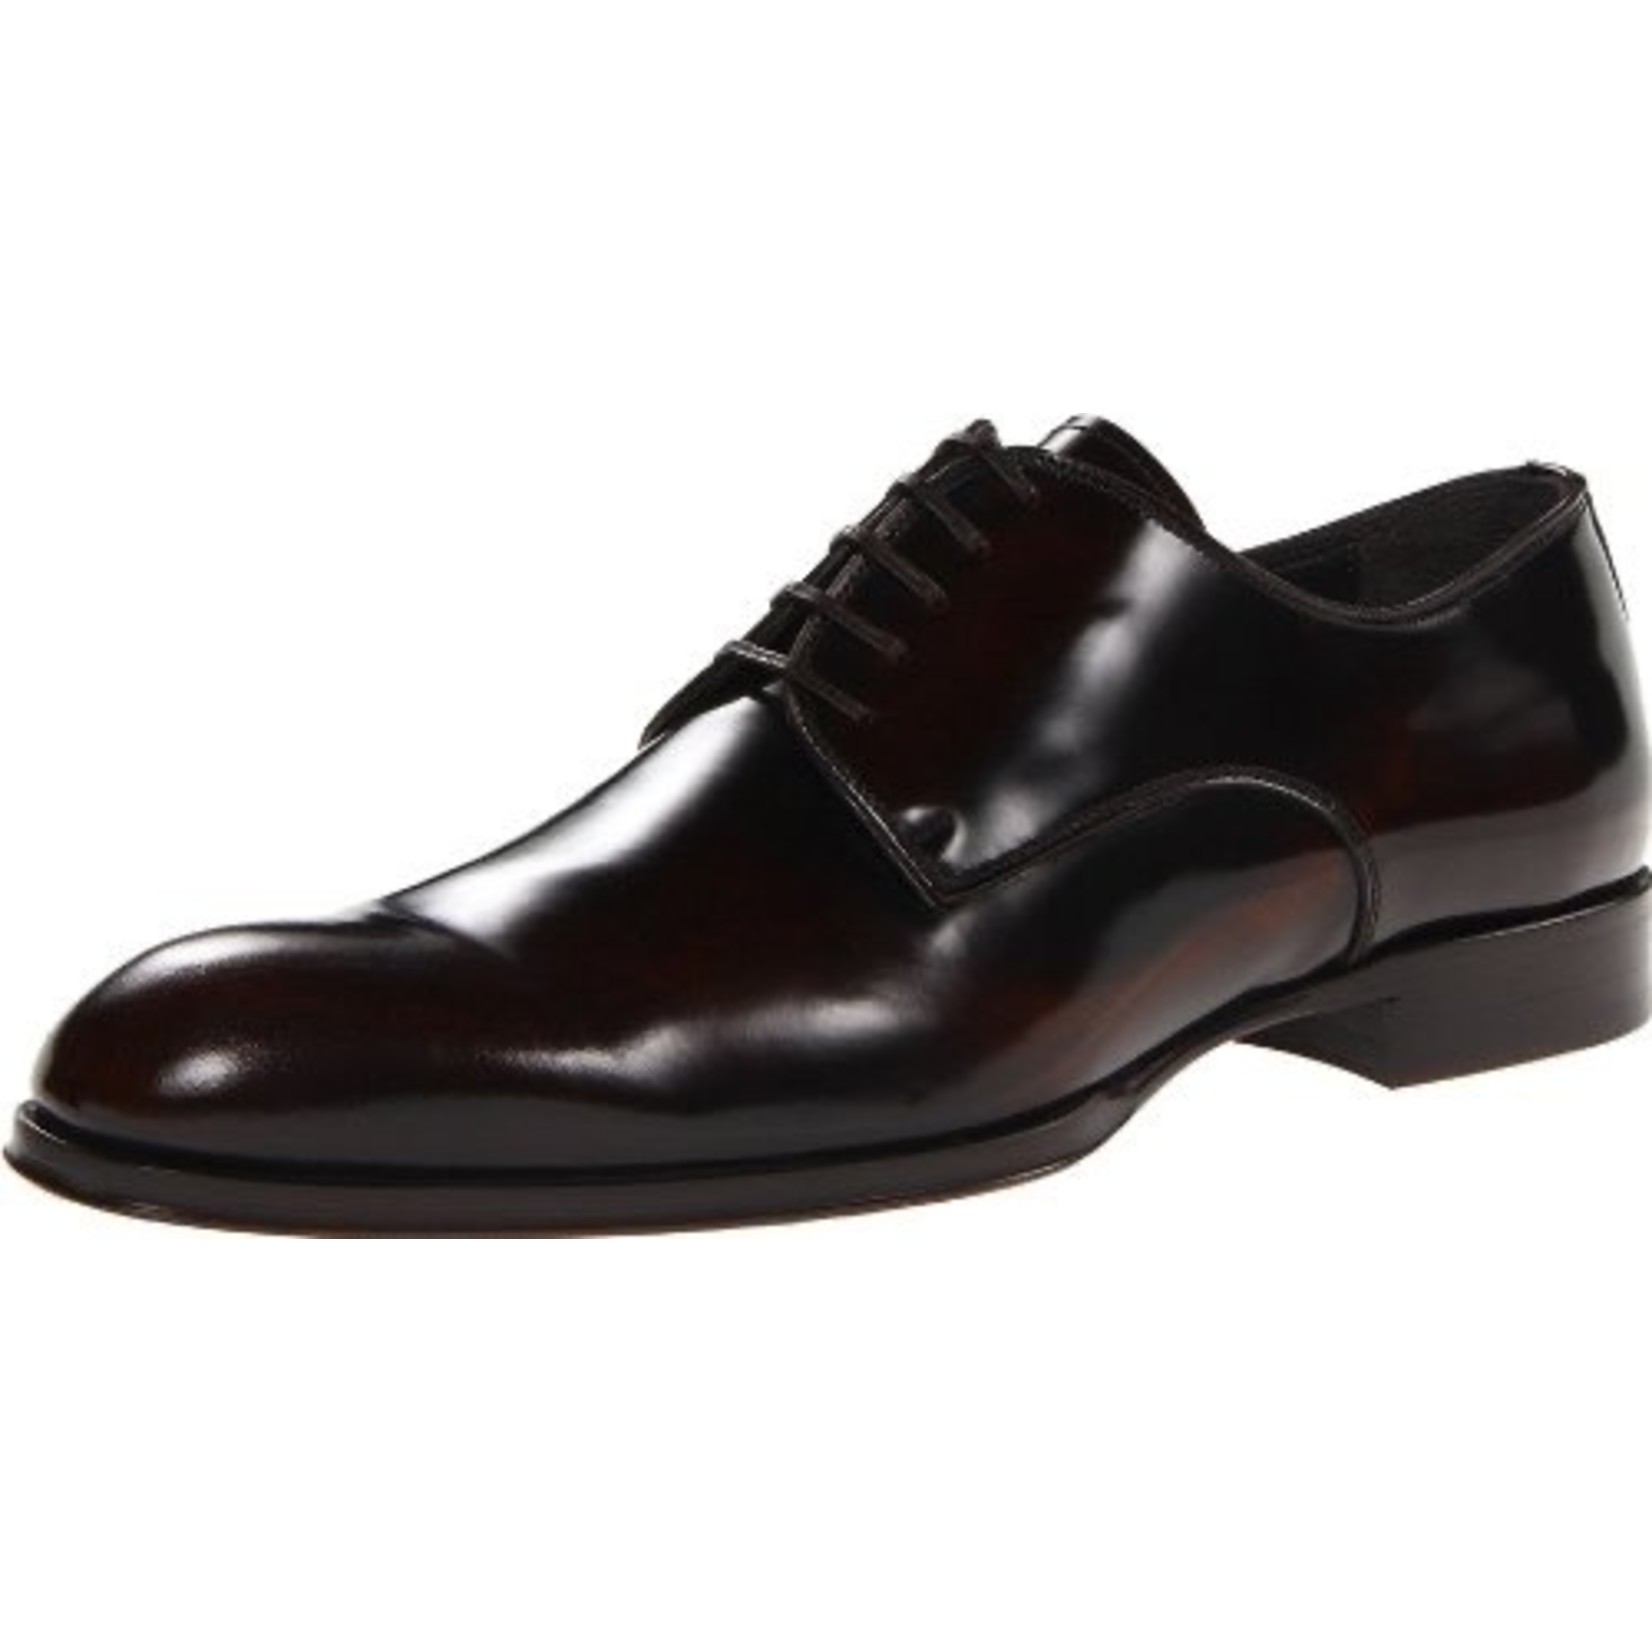 To Boot New York TMORO Lace-up Oxfords, 10.5M